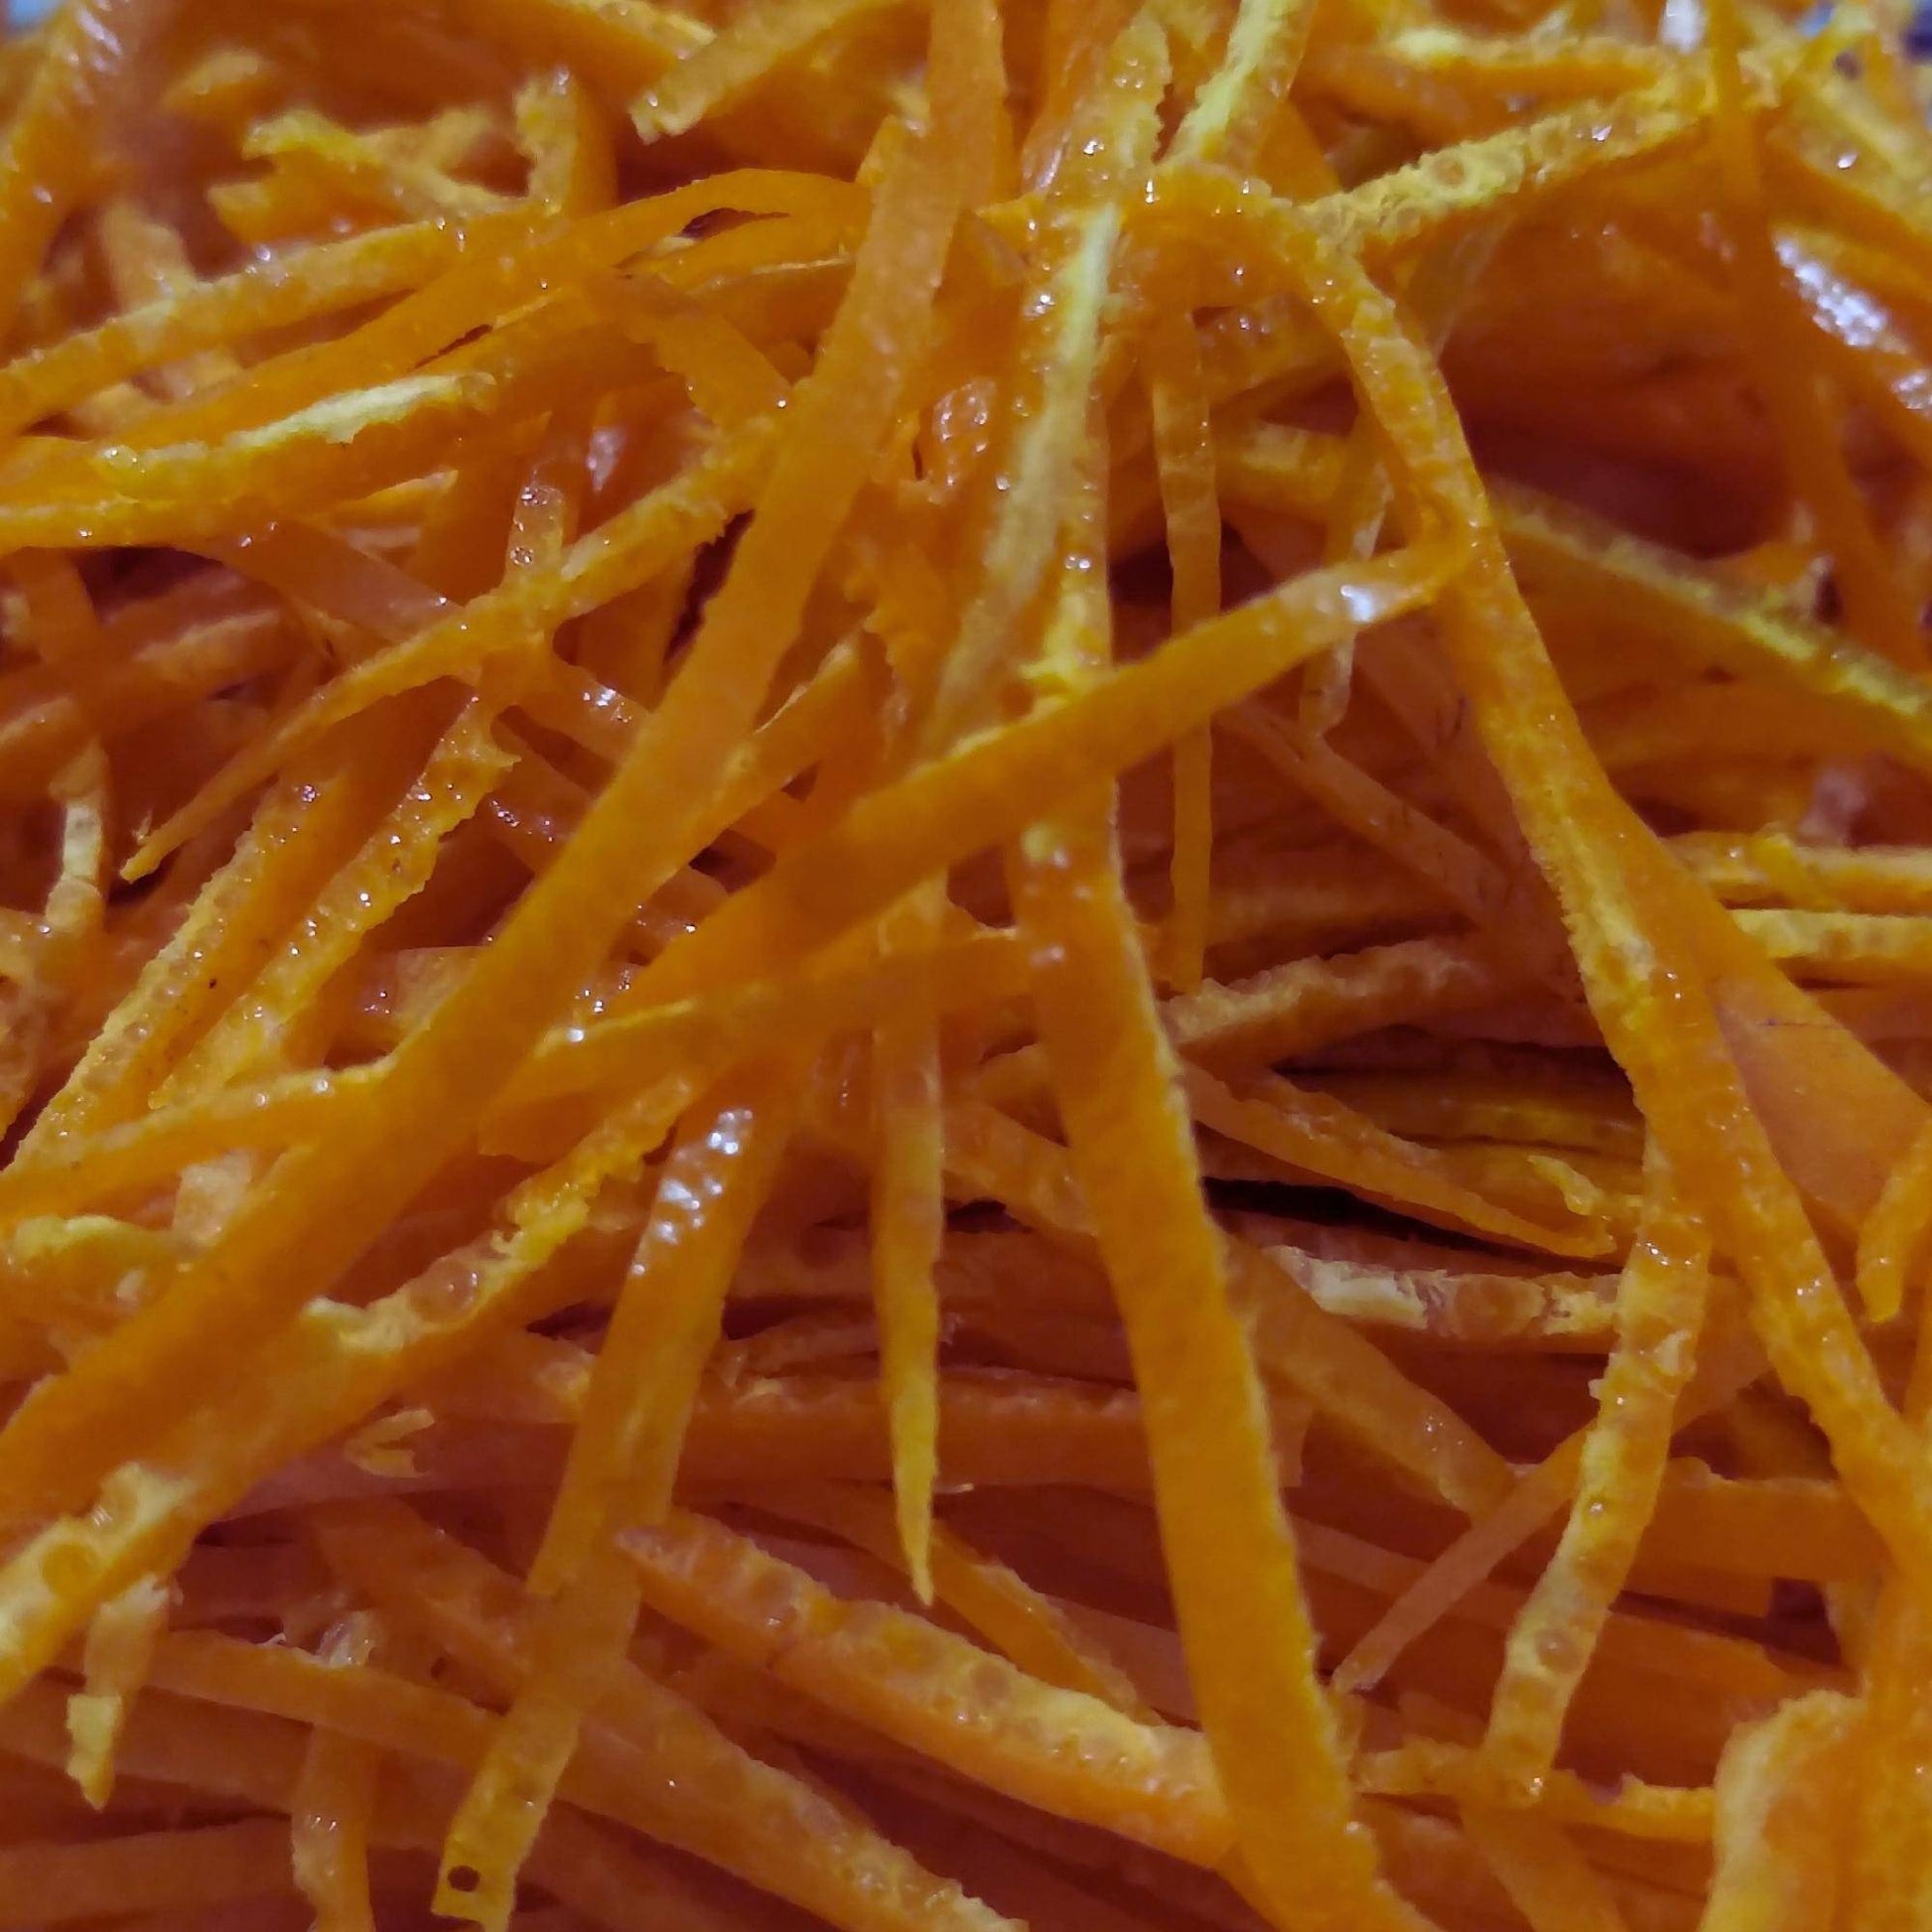 Orange Rind for the Marmalade